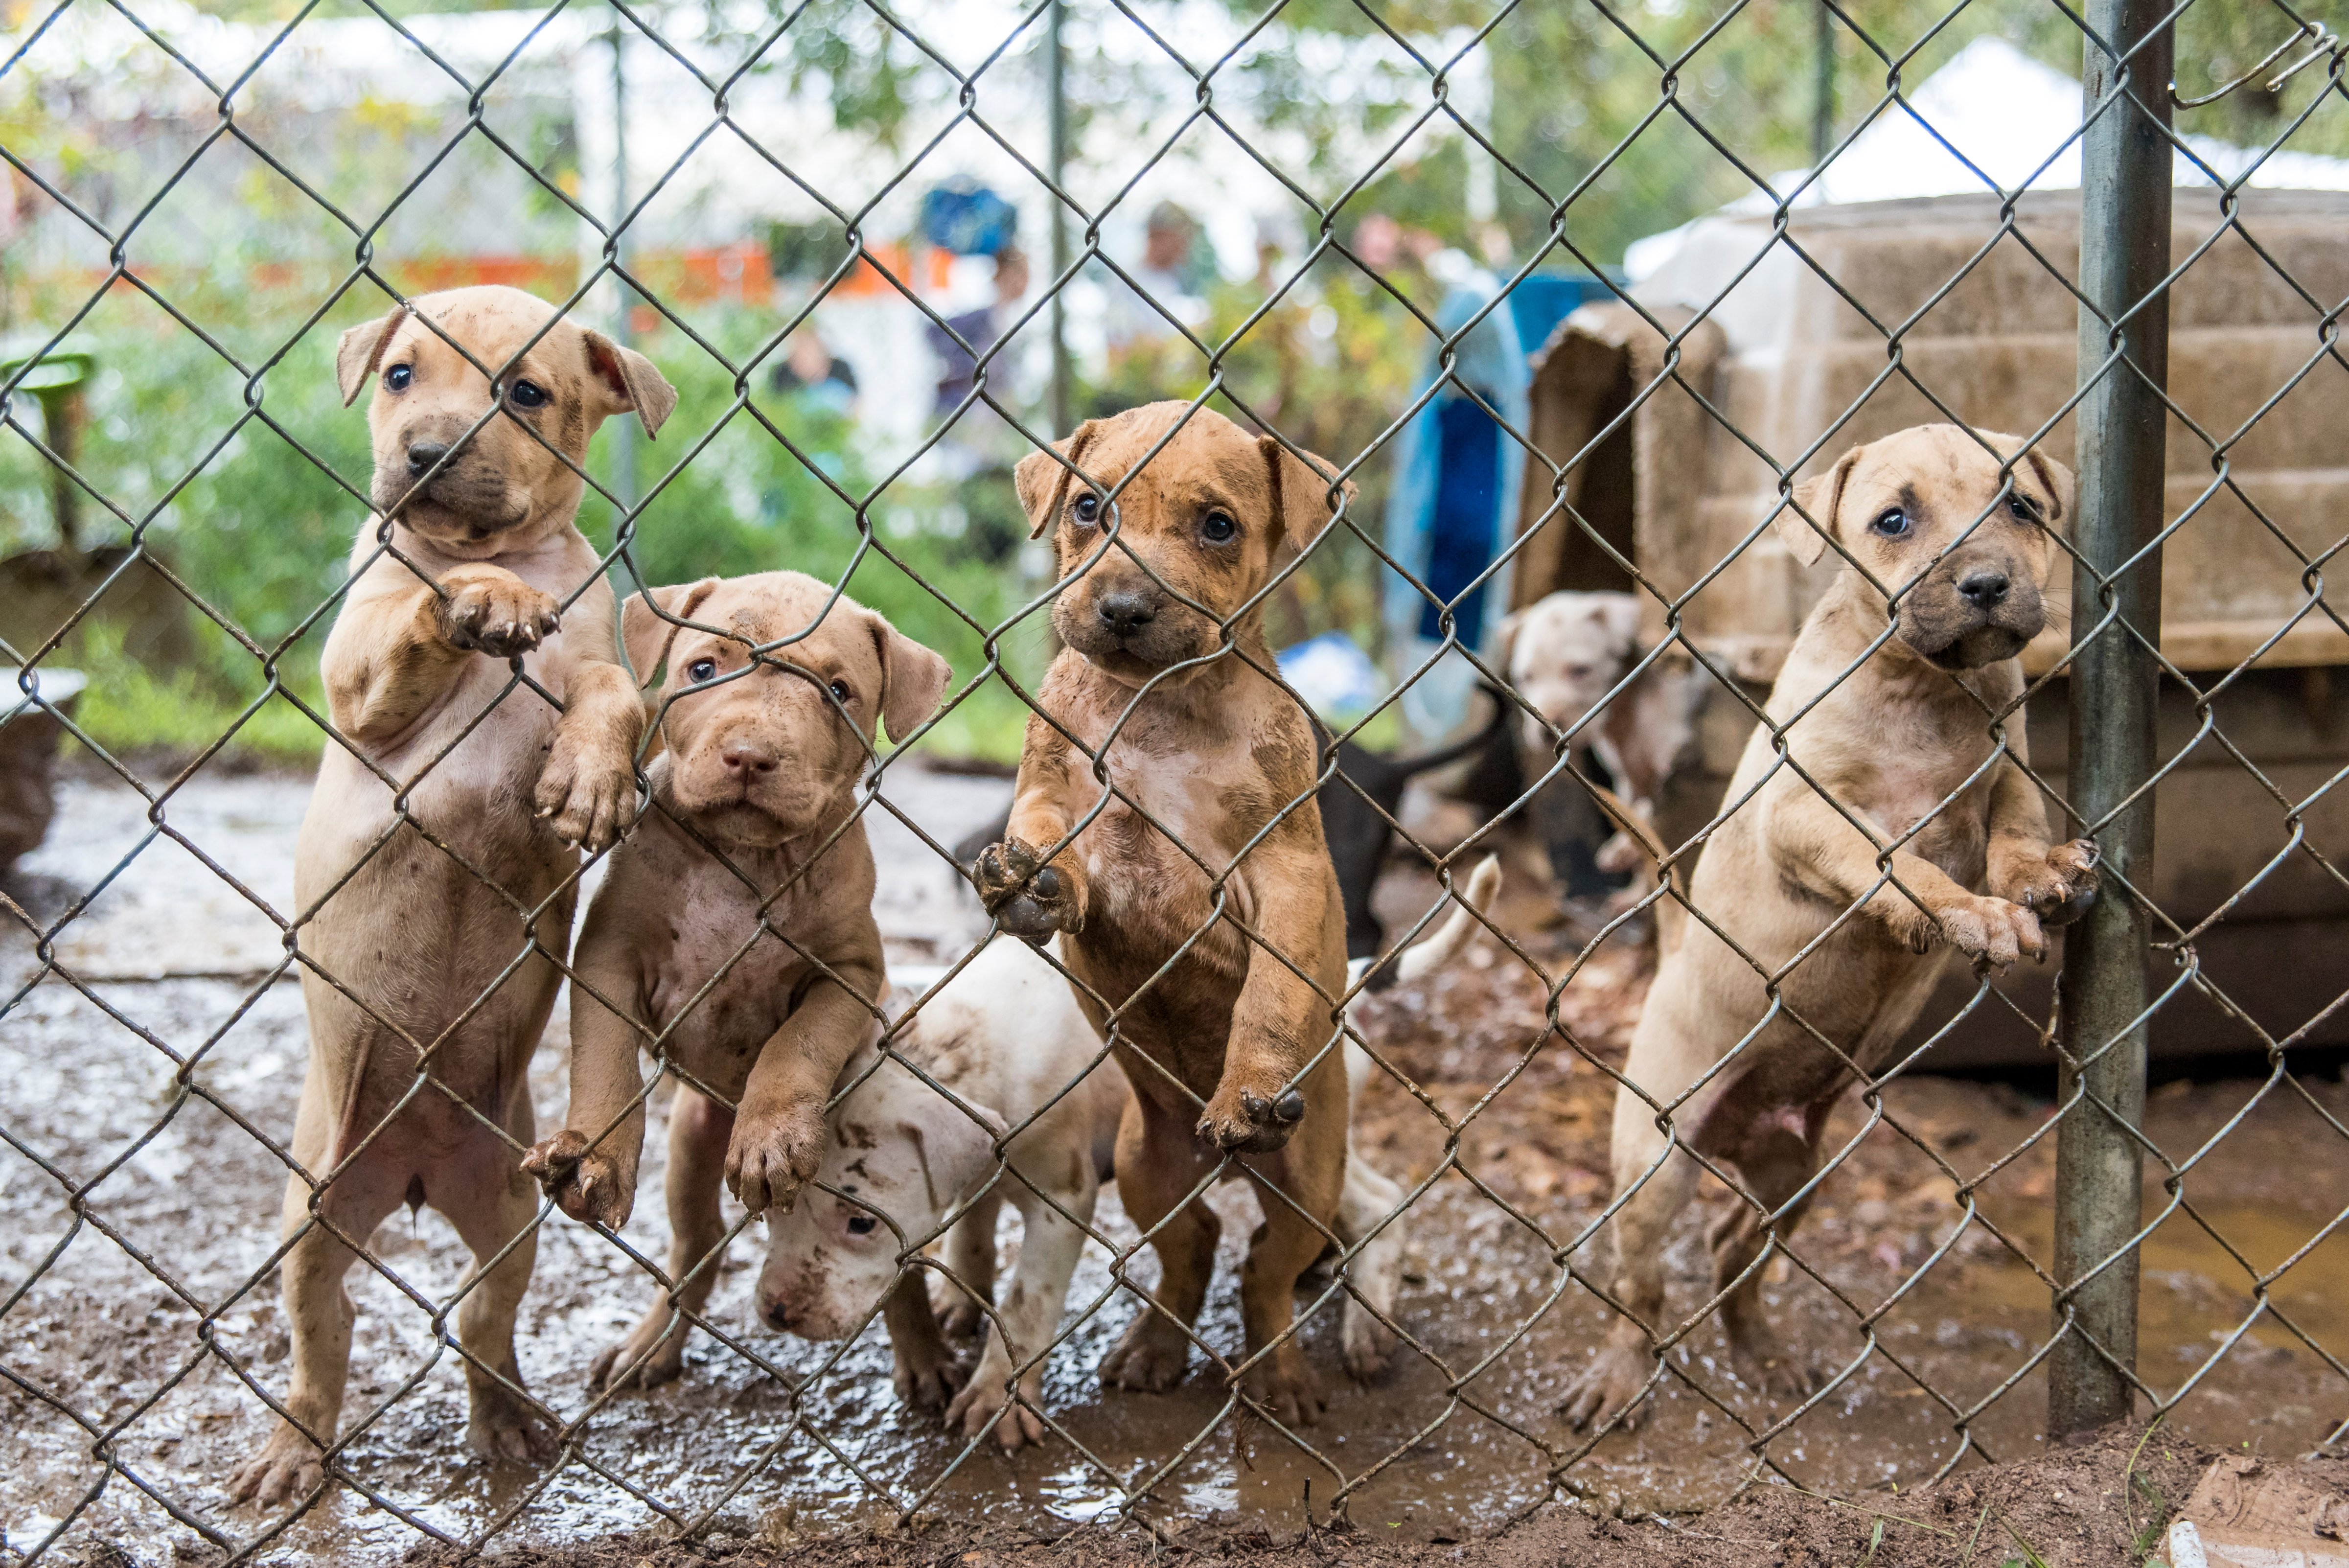 A Young pit bulls in Huntersville, North Carolina on Sept. 29, 2015. (Stacey Axelrod—ASPCA)